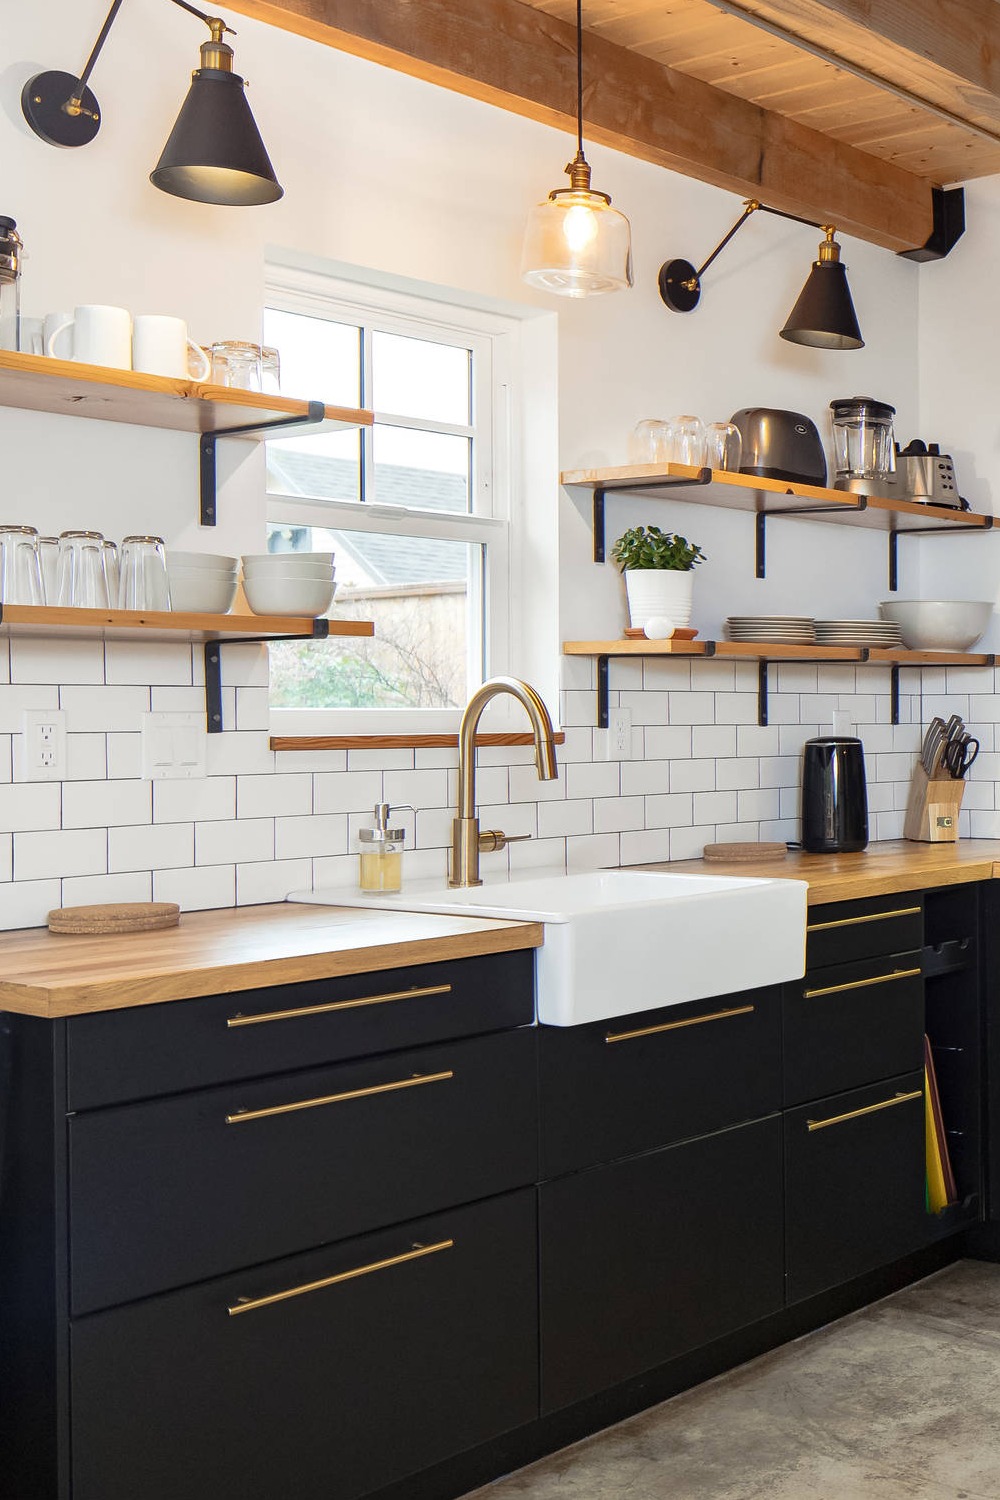 Small Kitchen Image Credit Dark Side Black Cabinetry Kitchen Space Open Shelving Bold Style